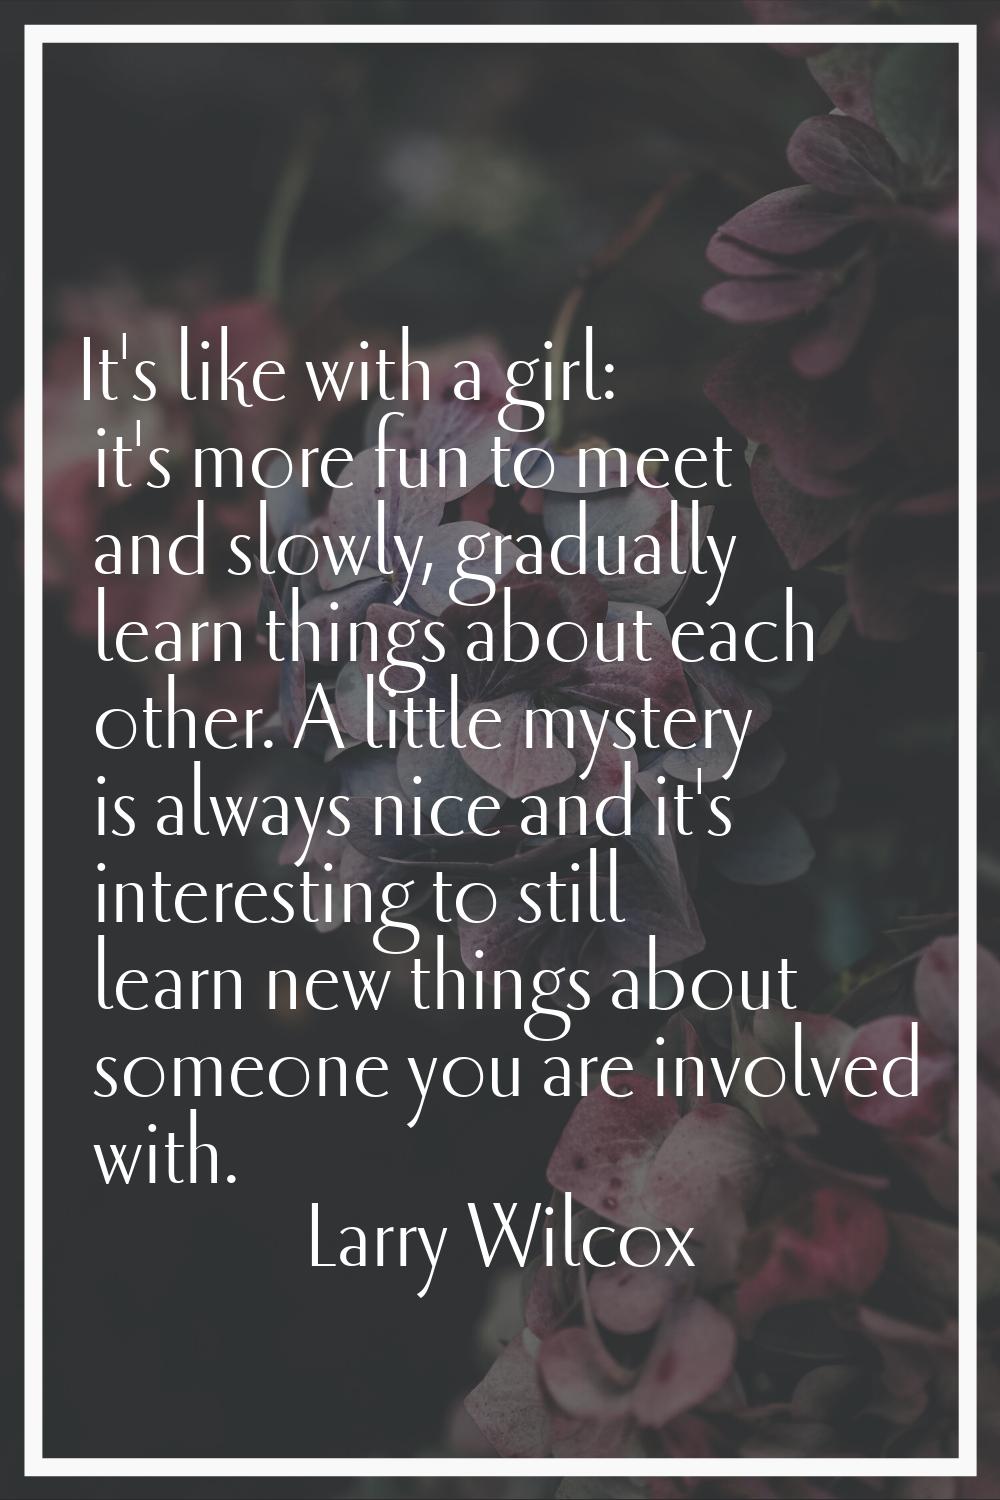 It's like with a girl: it's more fun to meet and slowly, gradually learn things about each other. A